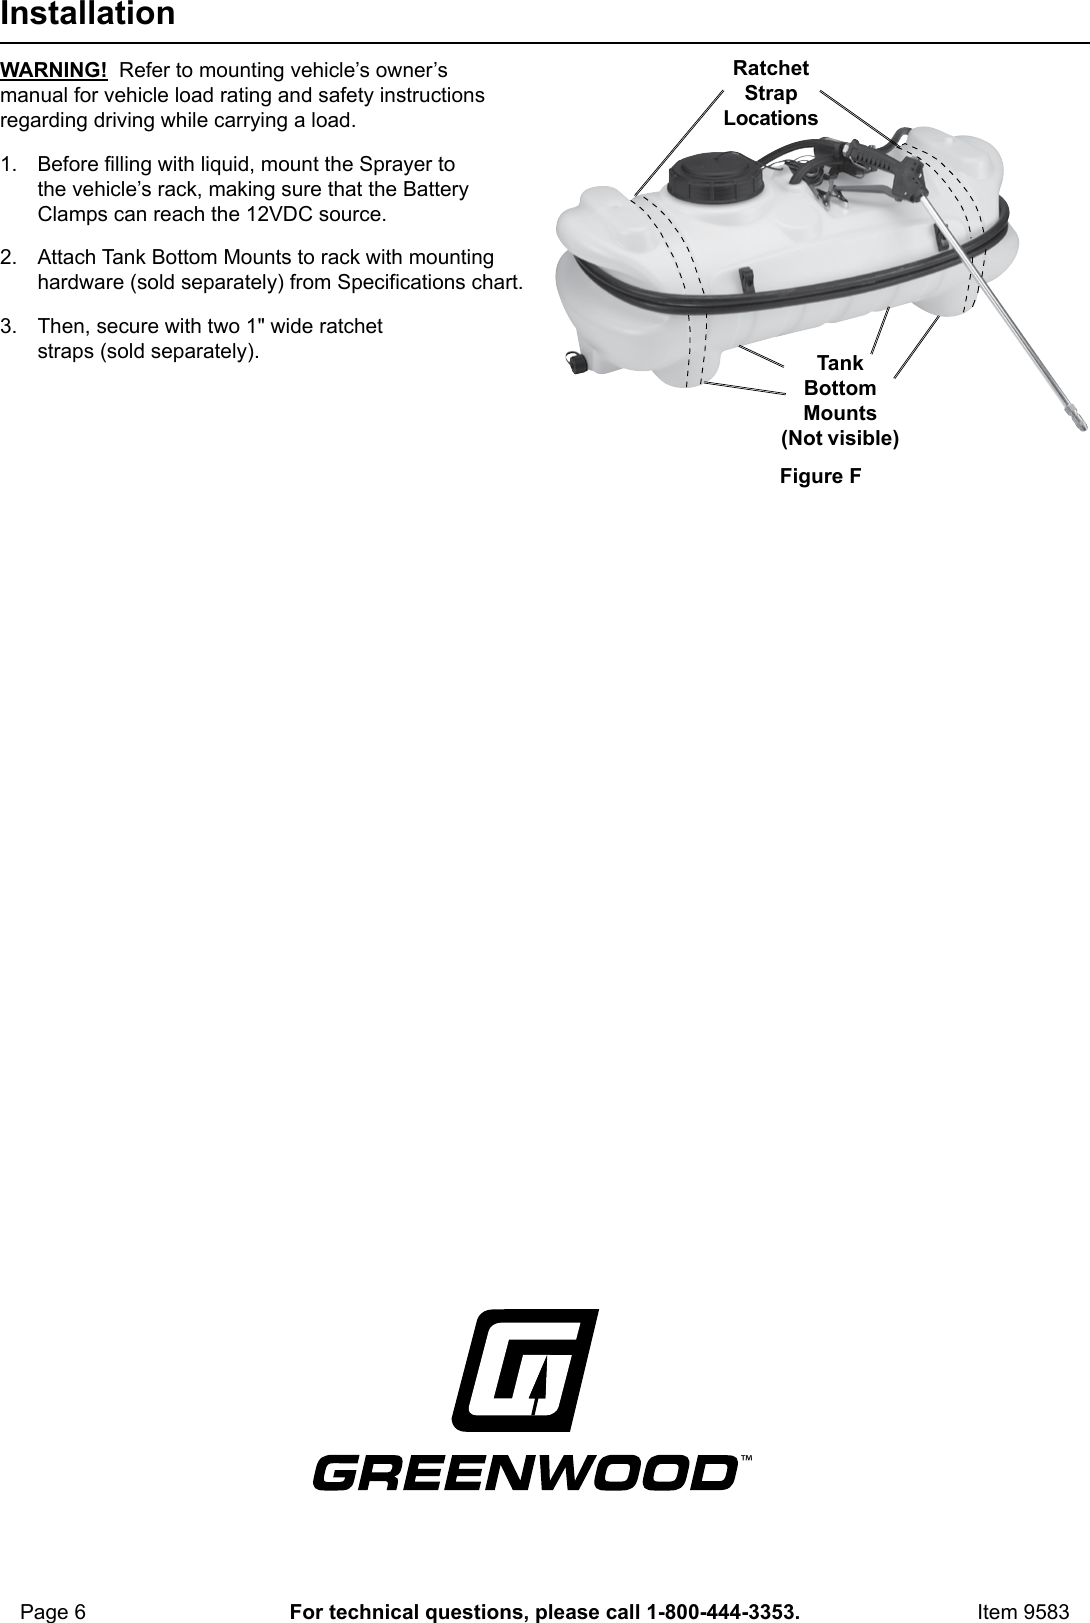 Page 6 of 12 - Harbor-Freight Harbor-Freight-9583-Owner-S-Manual